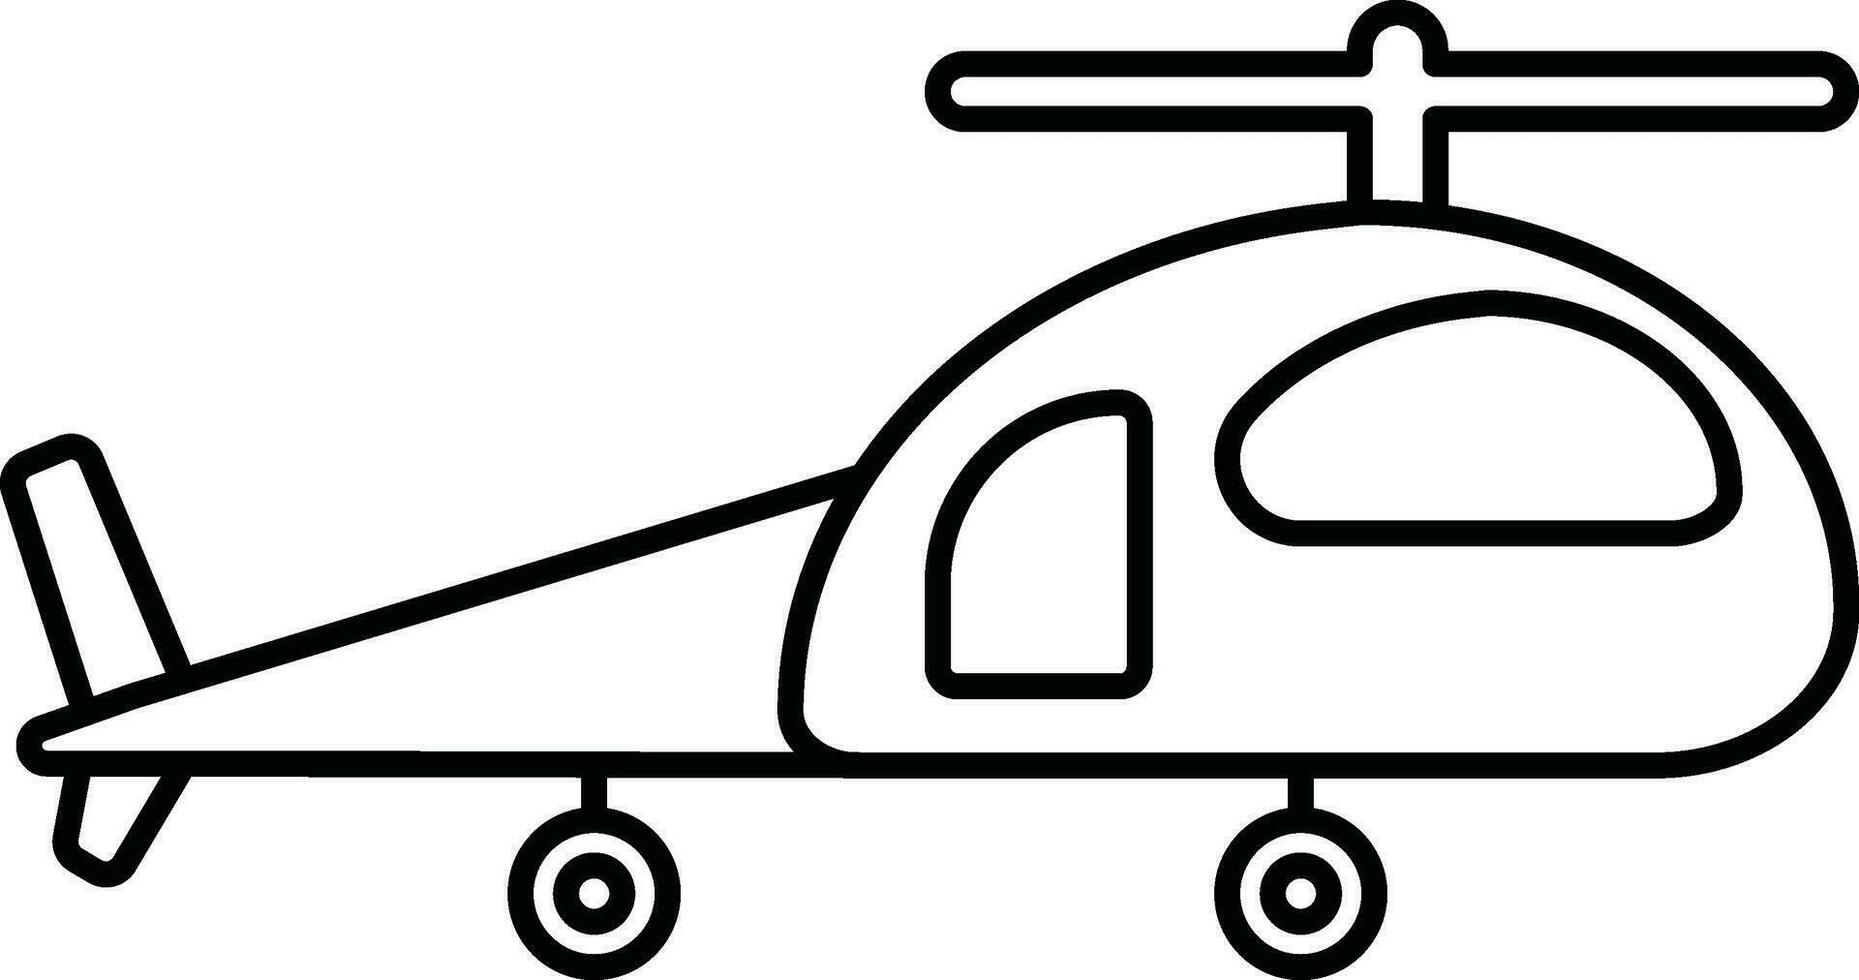 Stroke style of helicopter icon. vector